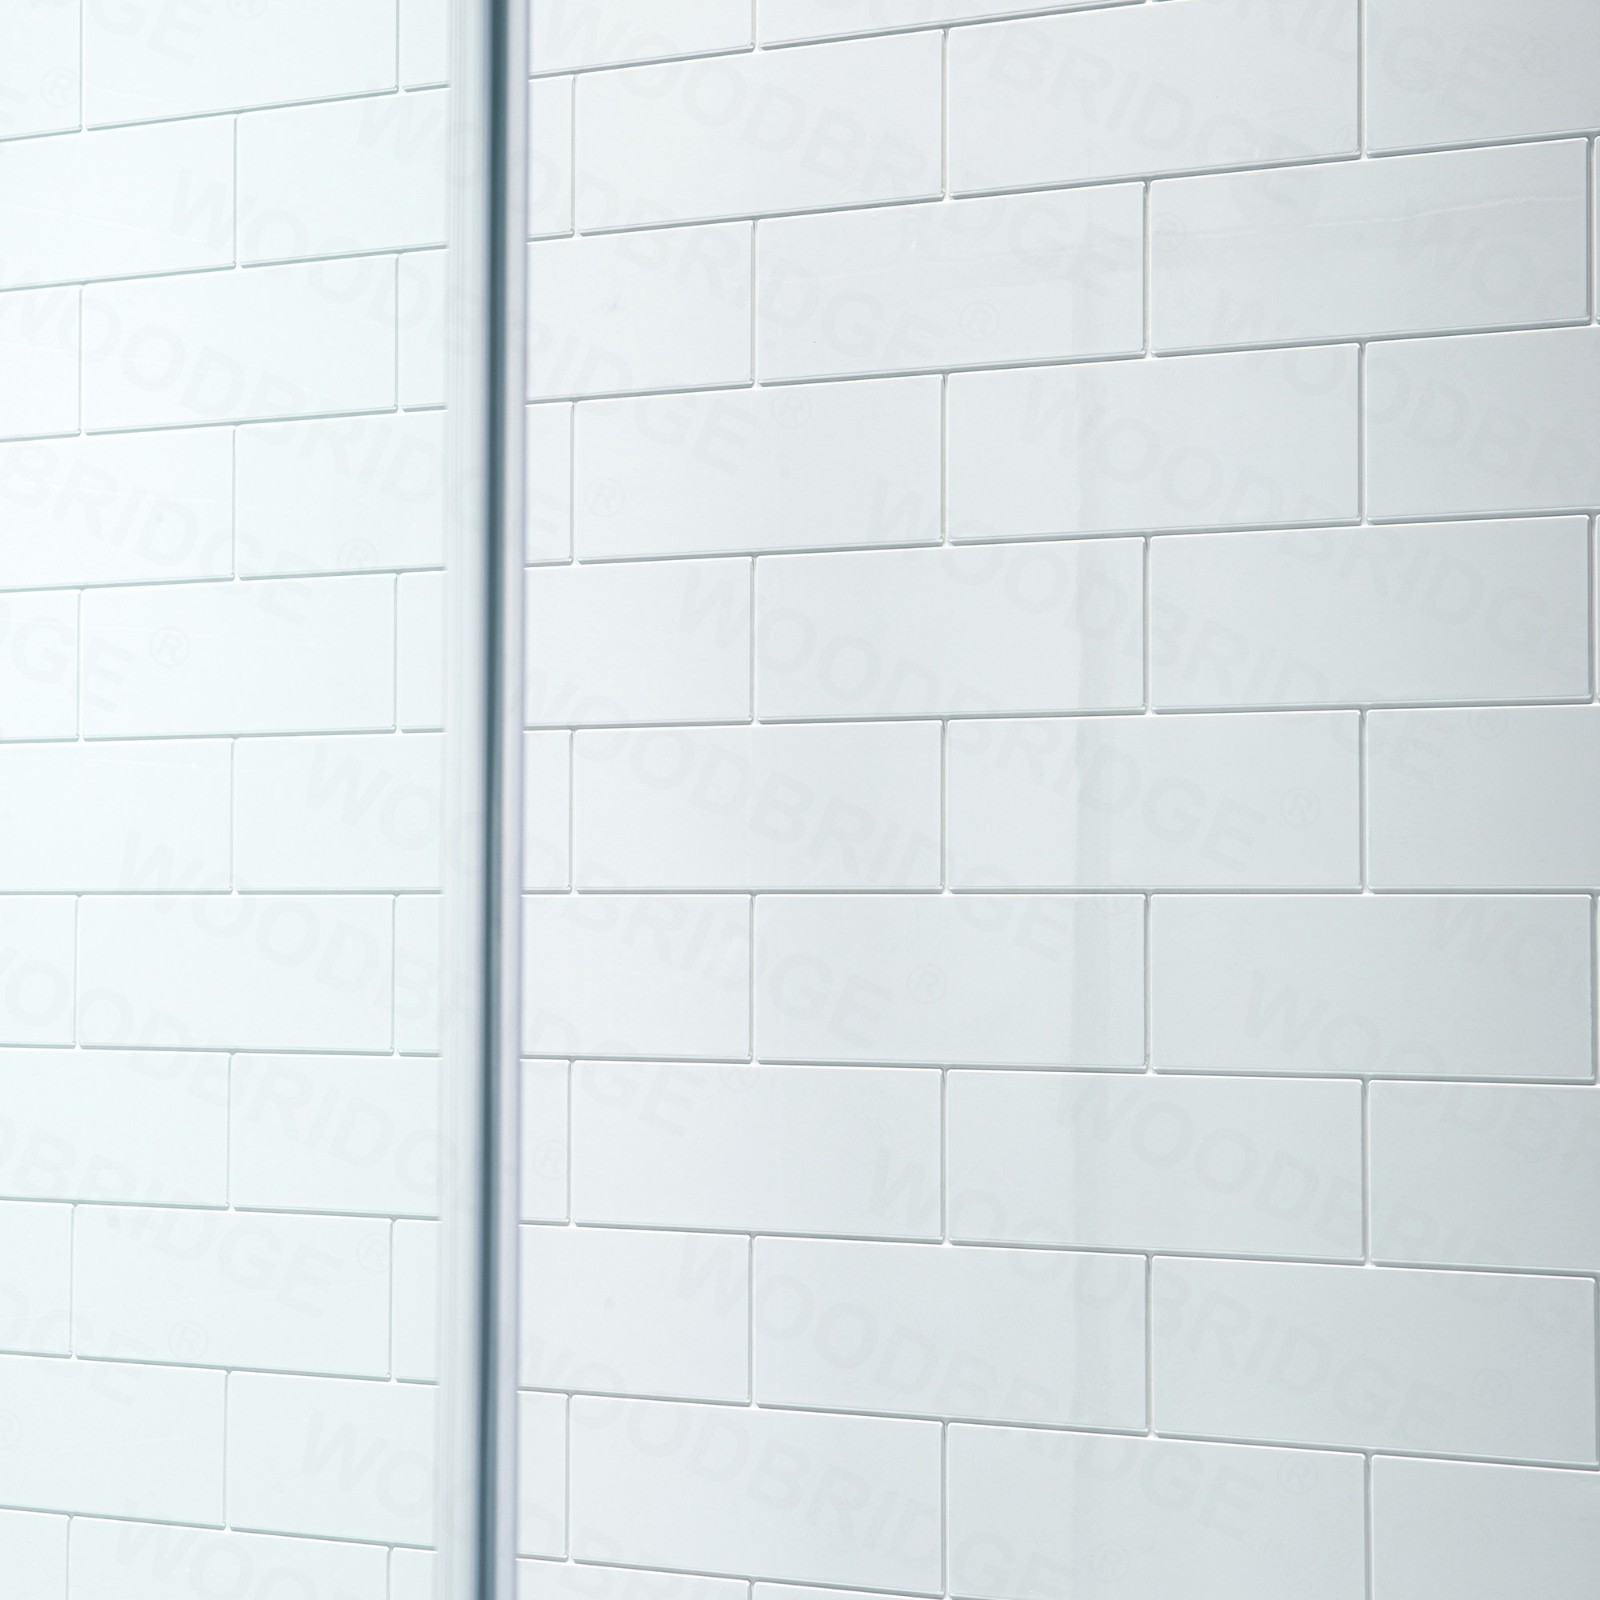  WOODBRIDGE SWP603696-1-SU-H Solid Surface 3-Panel Shower Wall Kit, 36-in L x 60-in W x 96-in H, Staggered Brick Pattern, High Gloss, White_8478